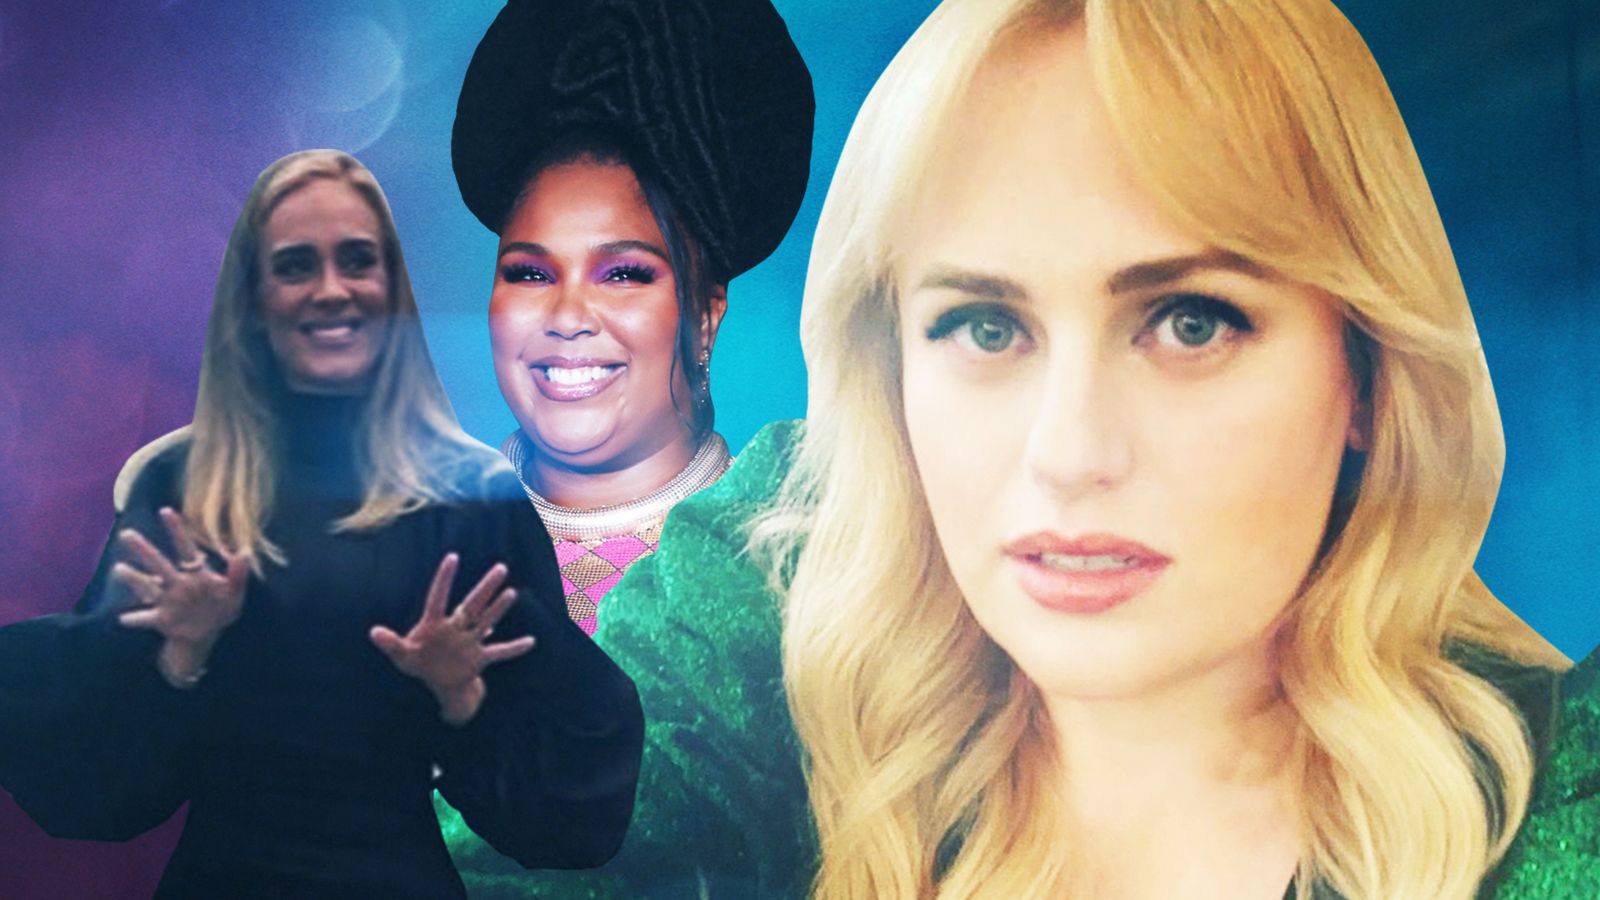 Rebel Wilson, Lizzo and Adele's personal fitness is just that. Personal.